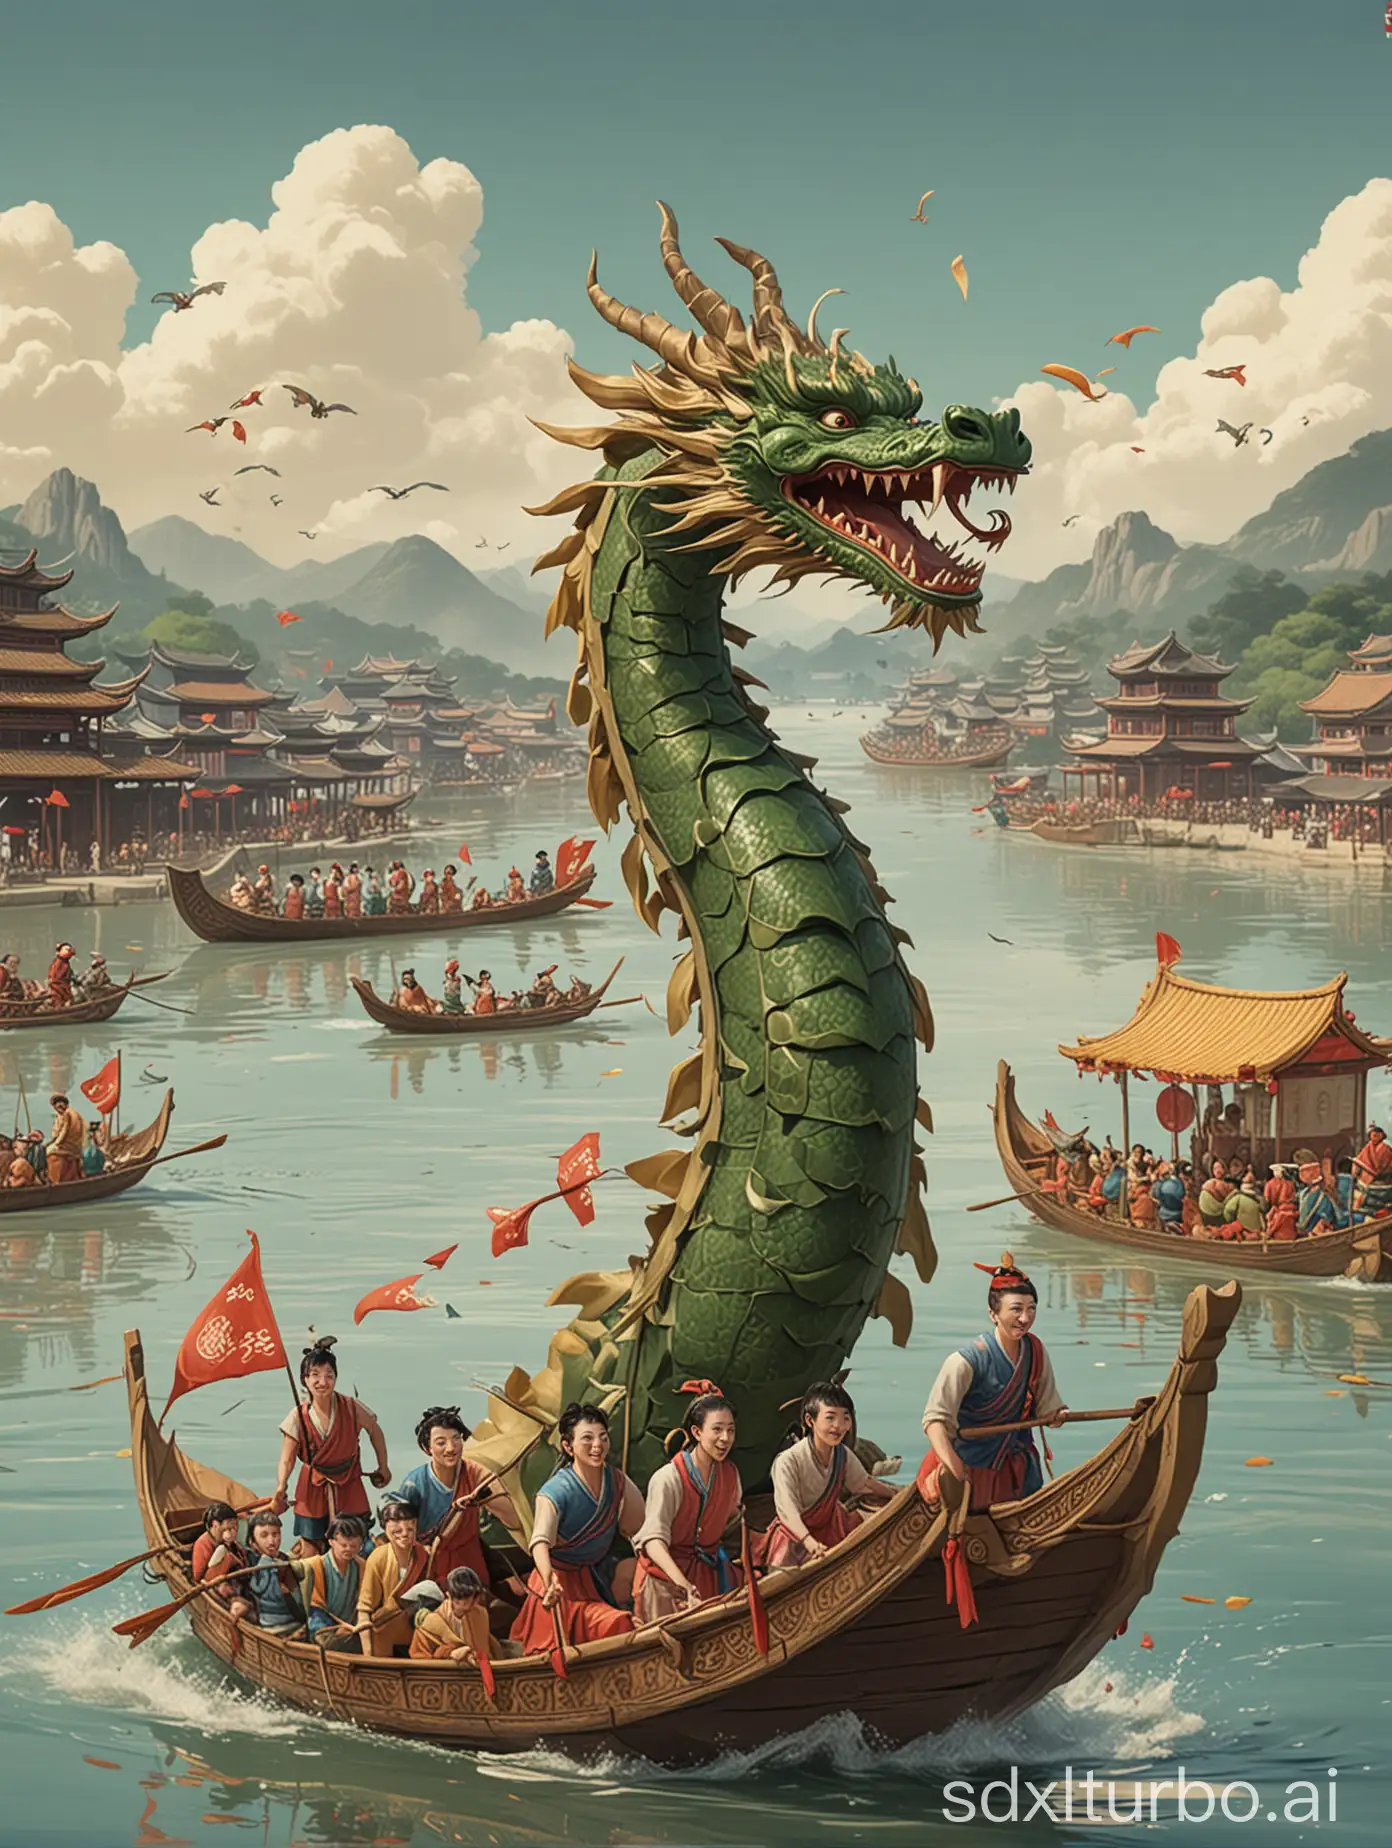 Dragon Boat Festival animation picture, with Ningbo regional characteristics